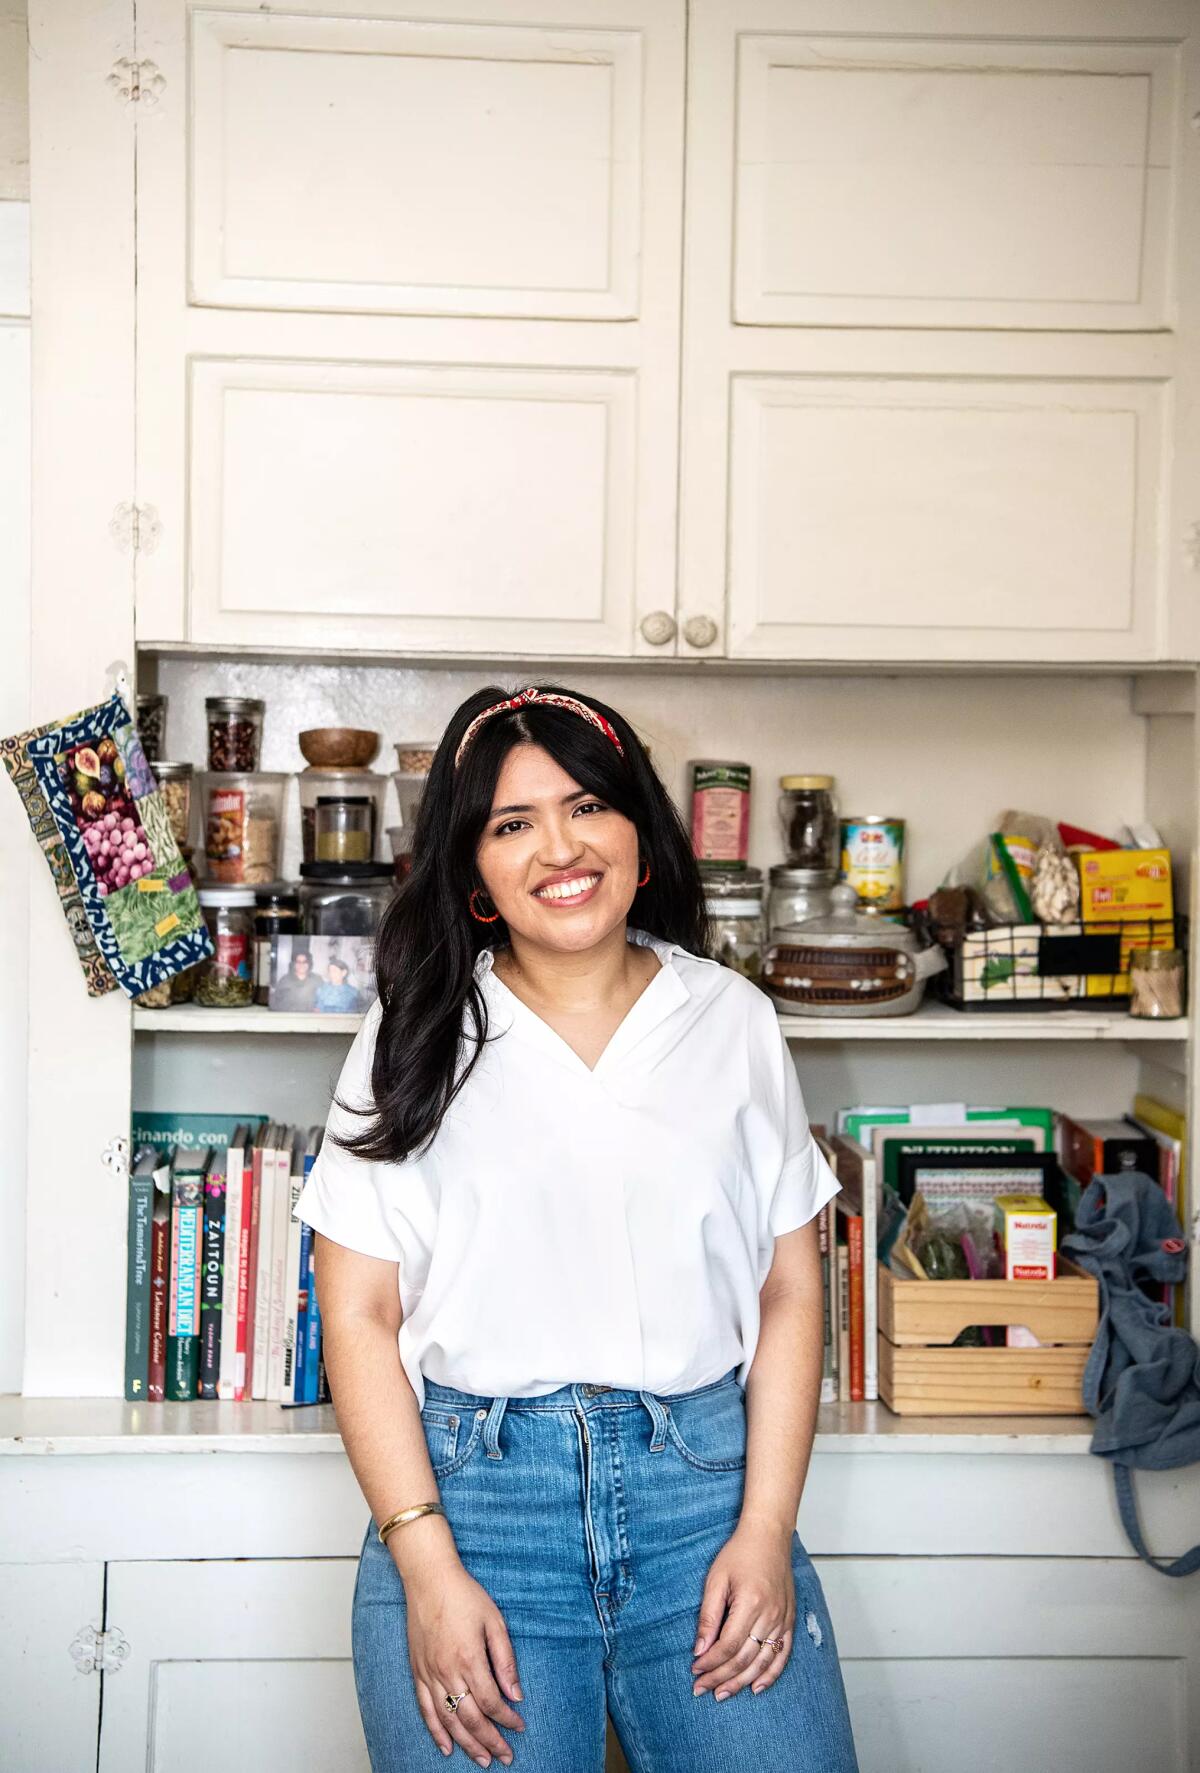 Karla Tatiana Vasquez inside her kitchen in 2020, as she worked to to get “The SalviSoul Cookbook” published.